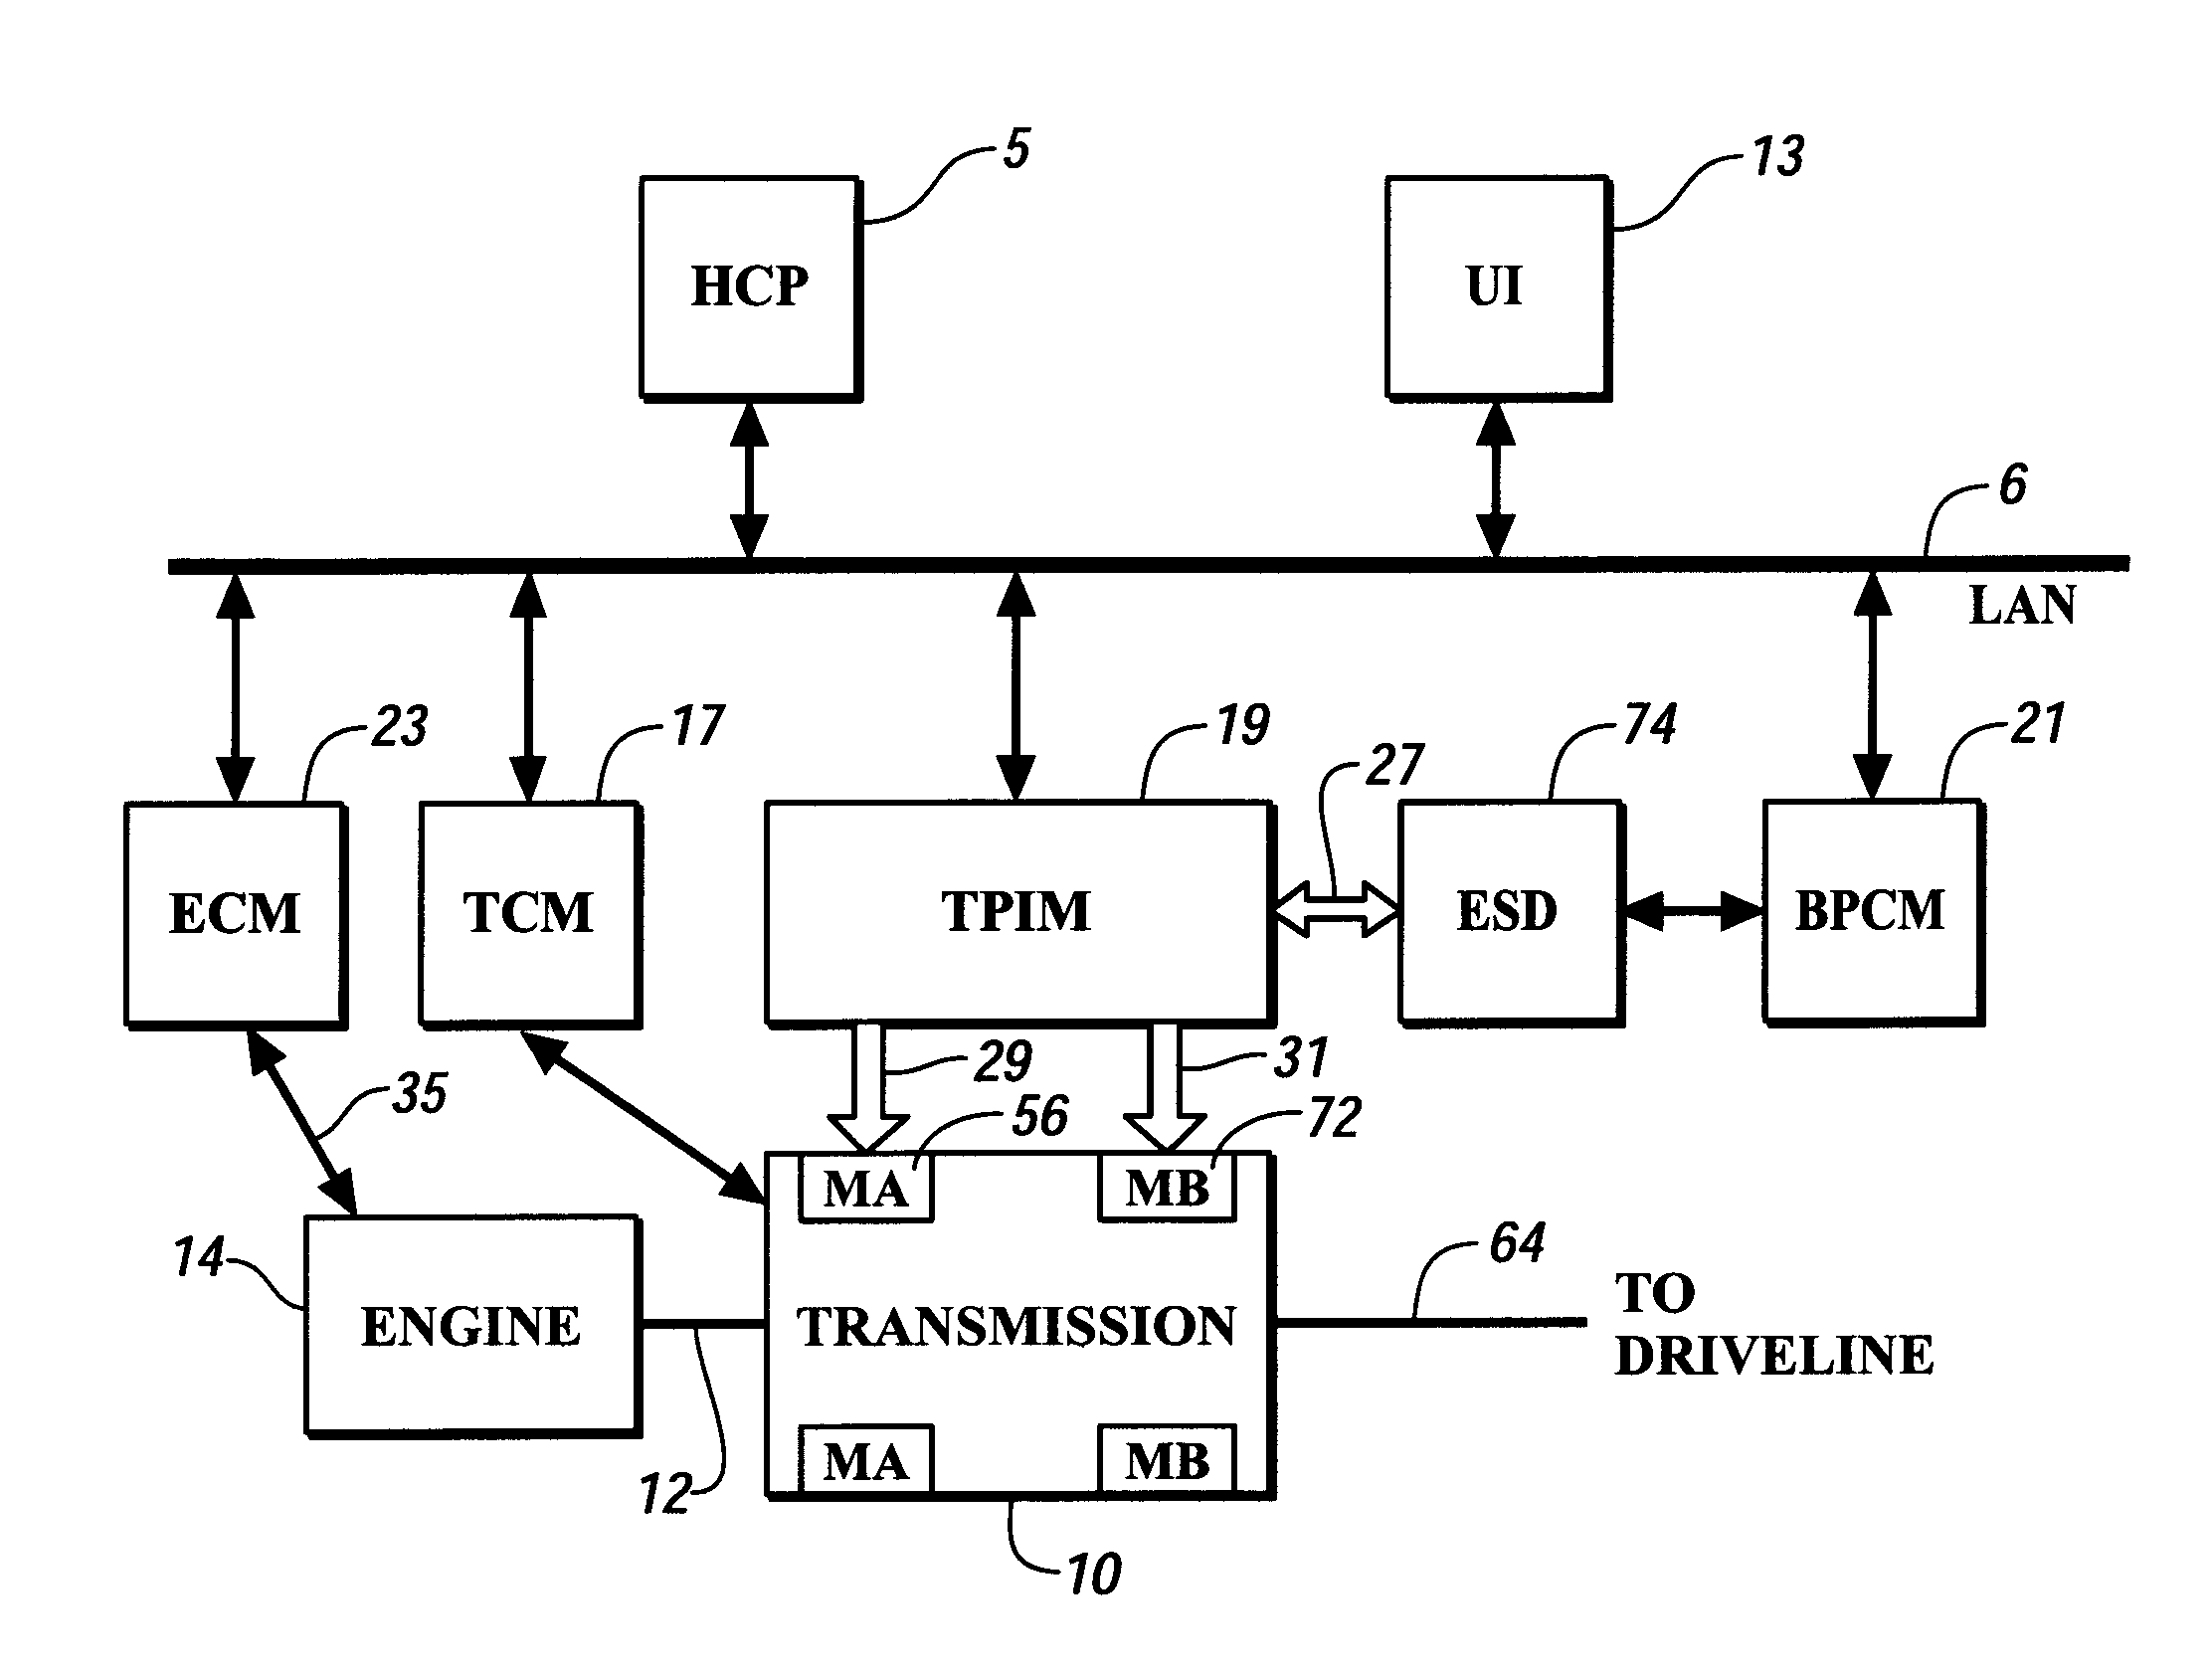 Method and apparatus for control of a hybrid electric vehicle to achieve a target life objective for an energy storage device